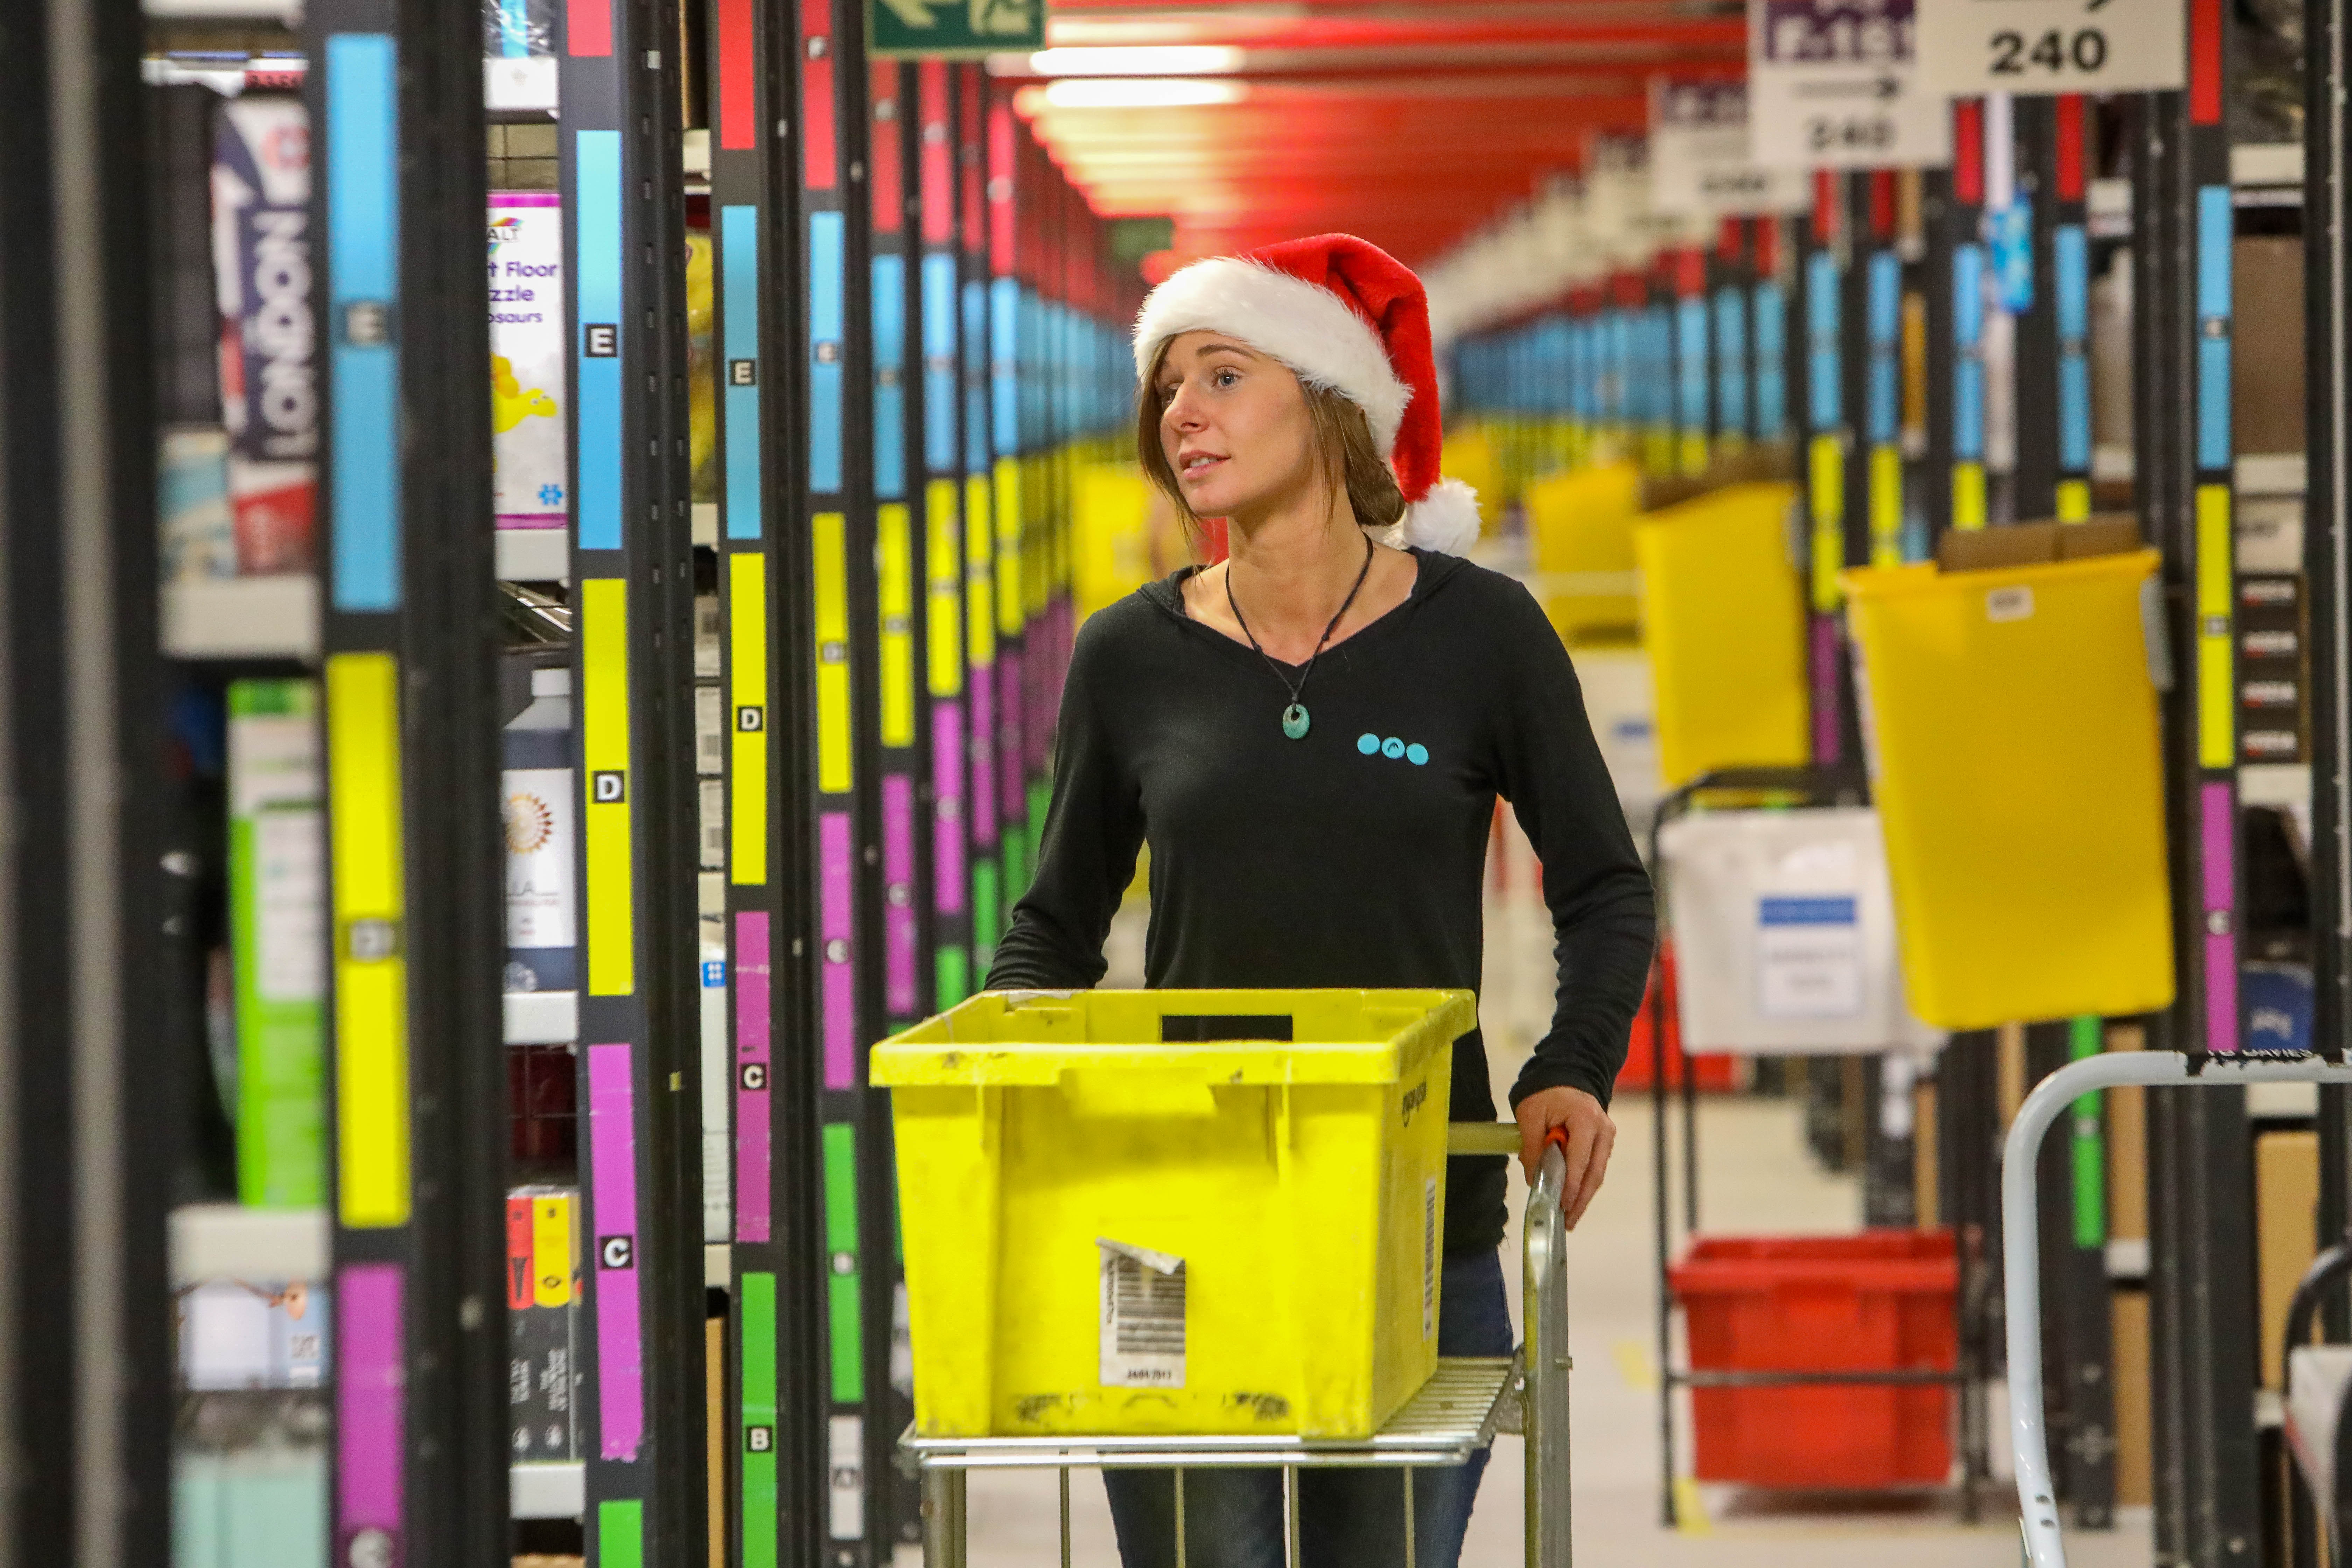 A worker at Amazon in Dunfermline